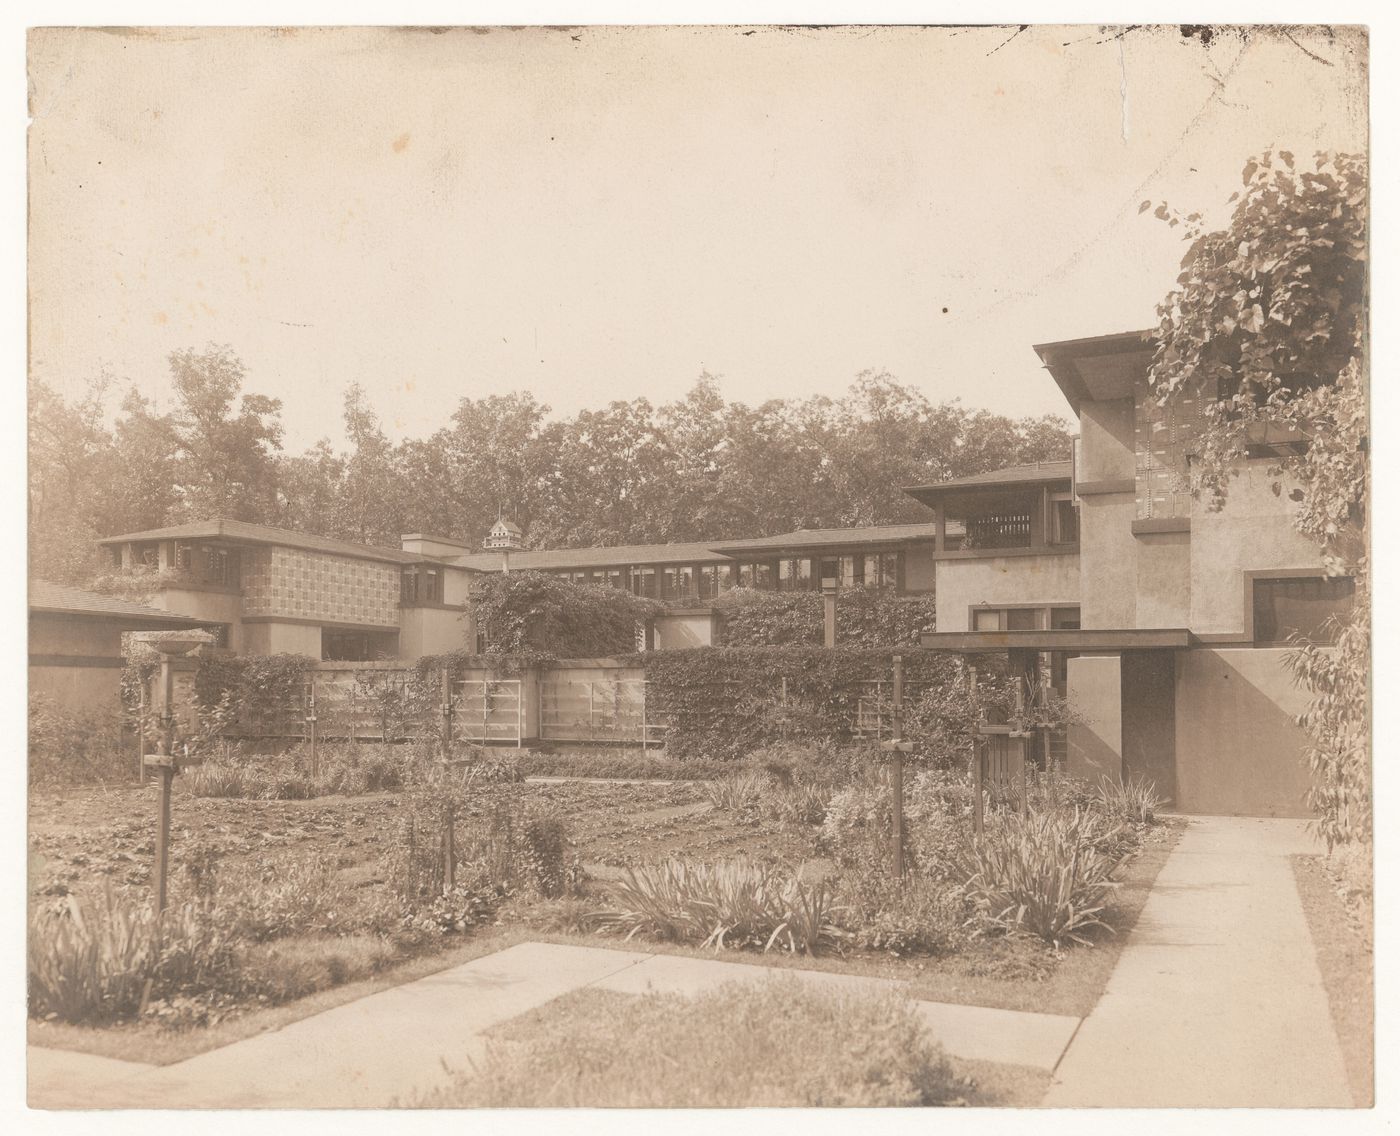 View of Coonley House from a garden path, Riverside, Illinois